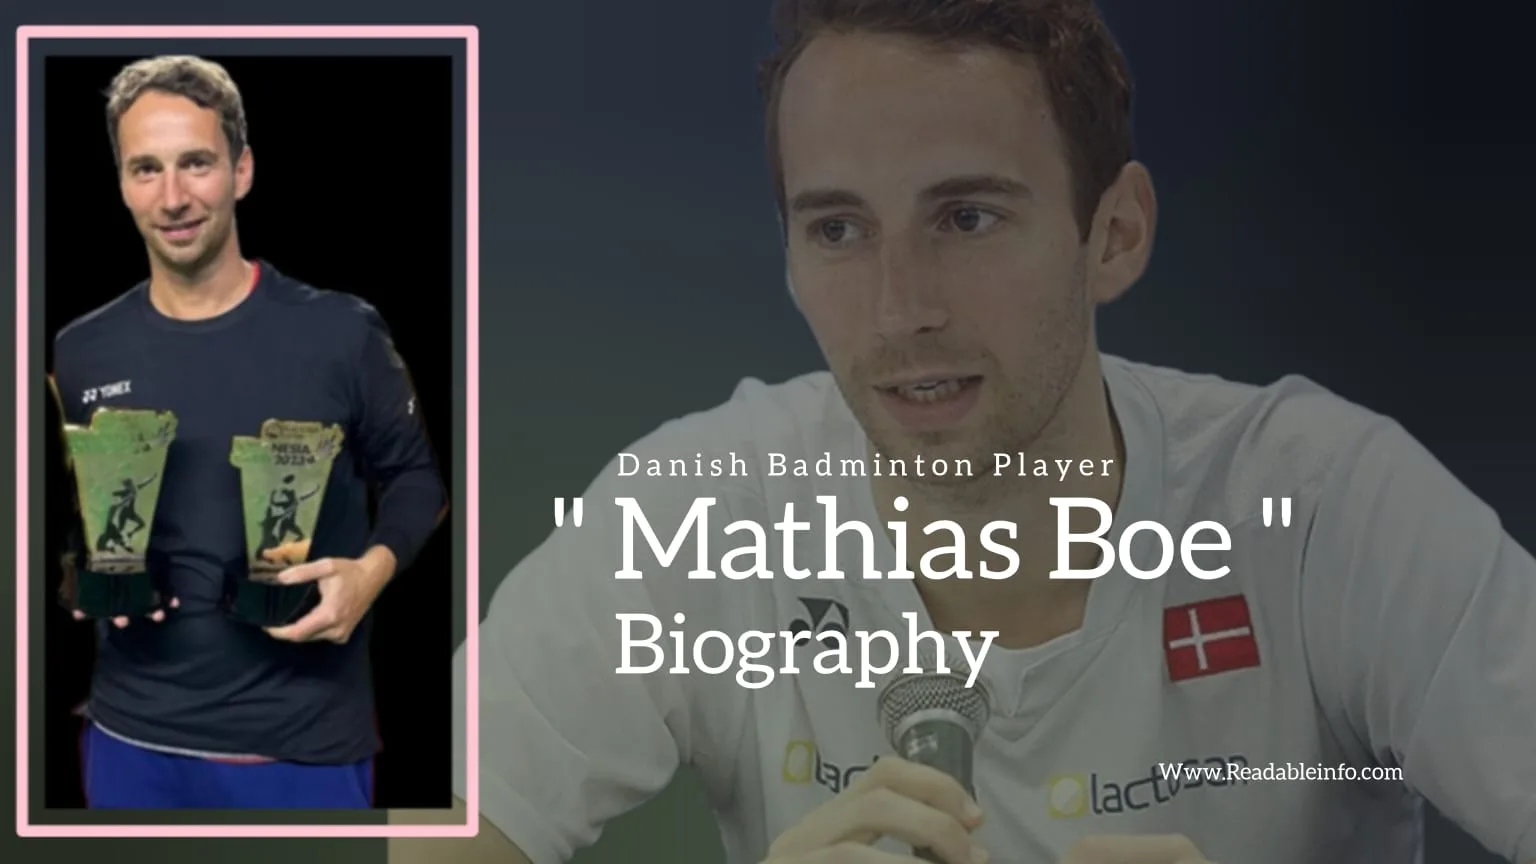 You are currently viewing Mathias Boe Biography (Danish Badminton Player)